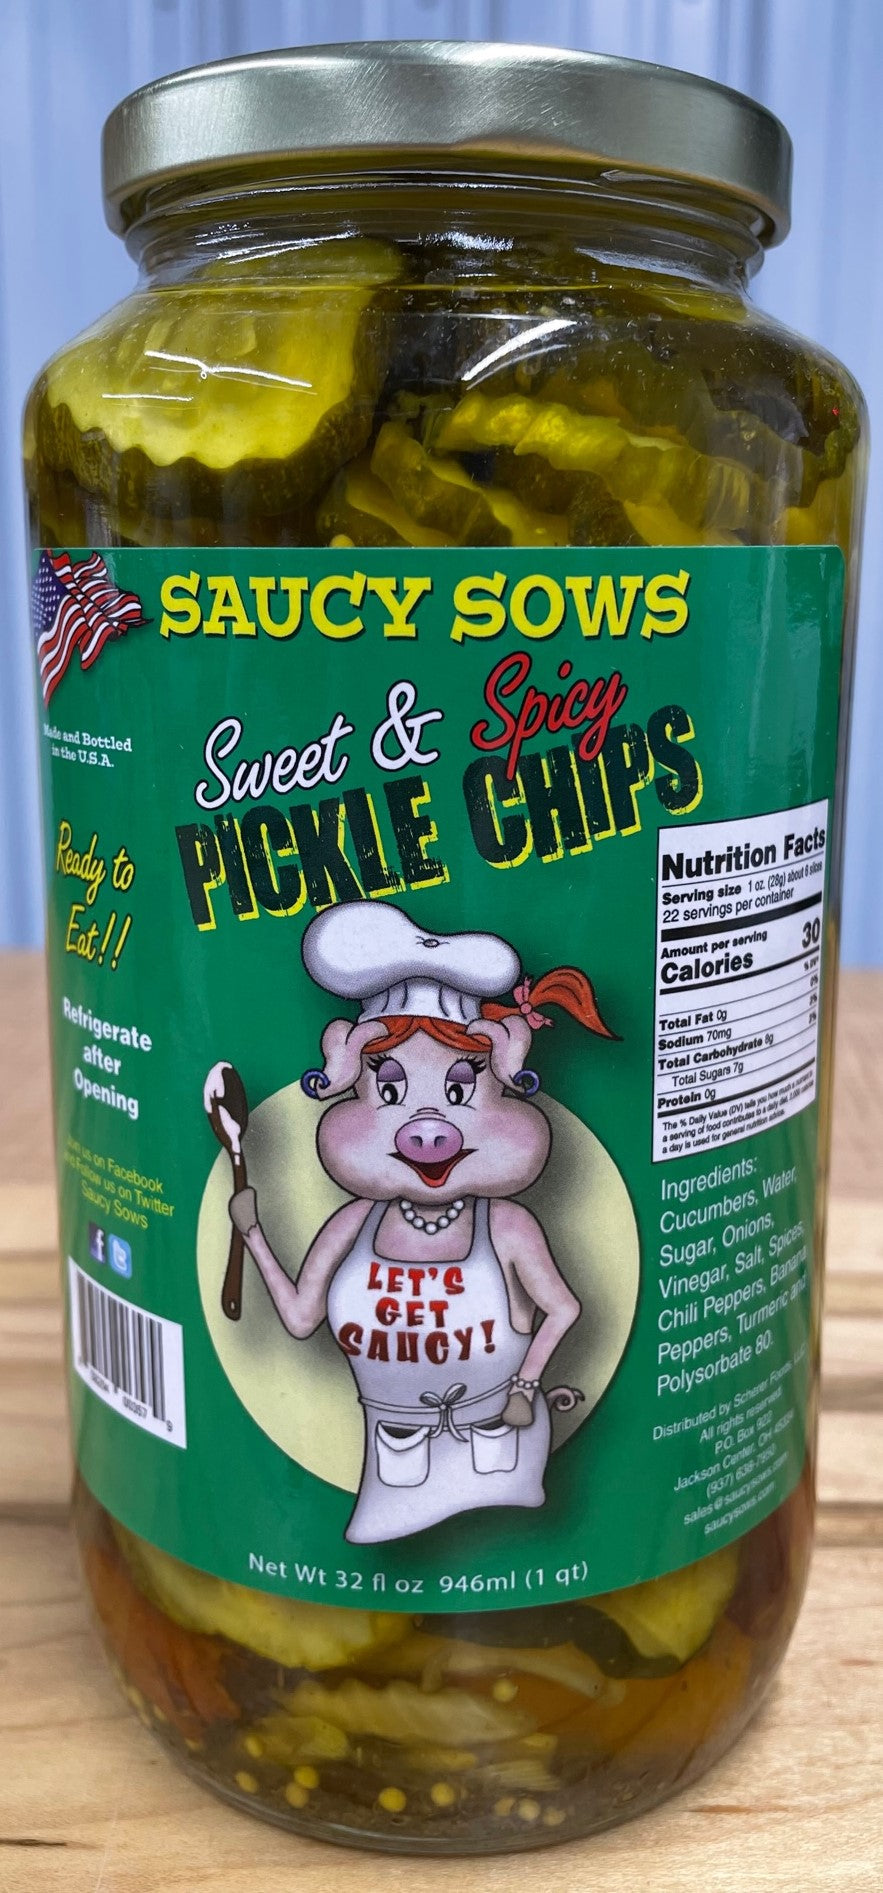 Saucy Sows Sweet & Spicy Pickle Chips